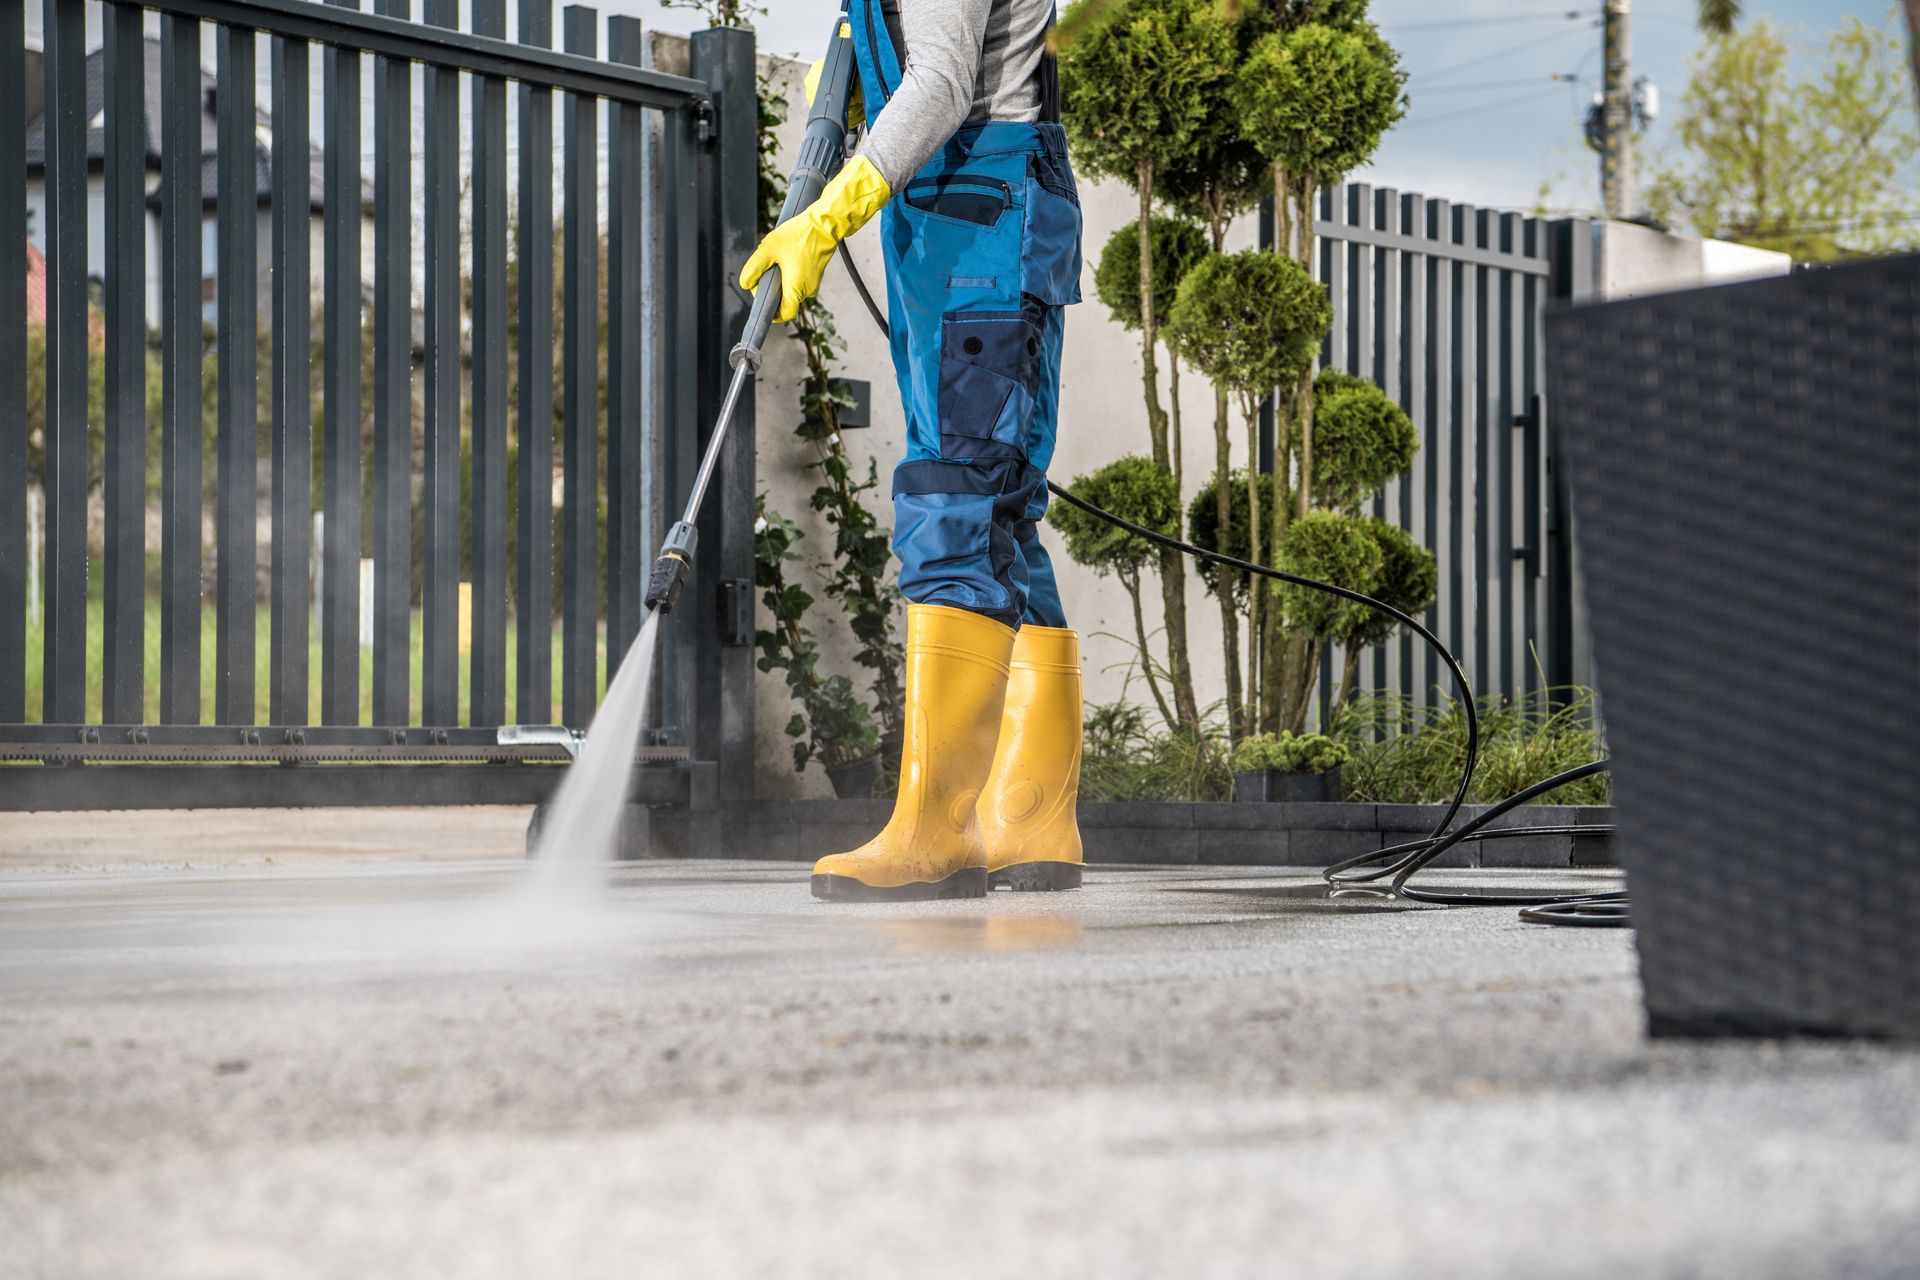 Man in Yellow Rain Boots and Work Uniform Pressure Washing Concrete Tiles of the Driveway to His House Behind the Closed Yard Entrance Gate